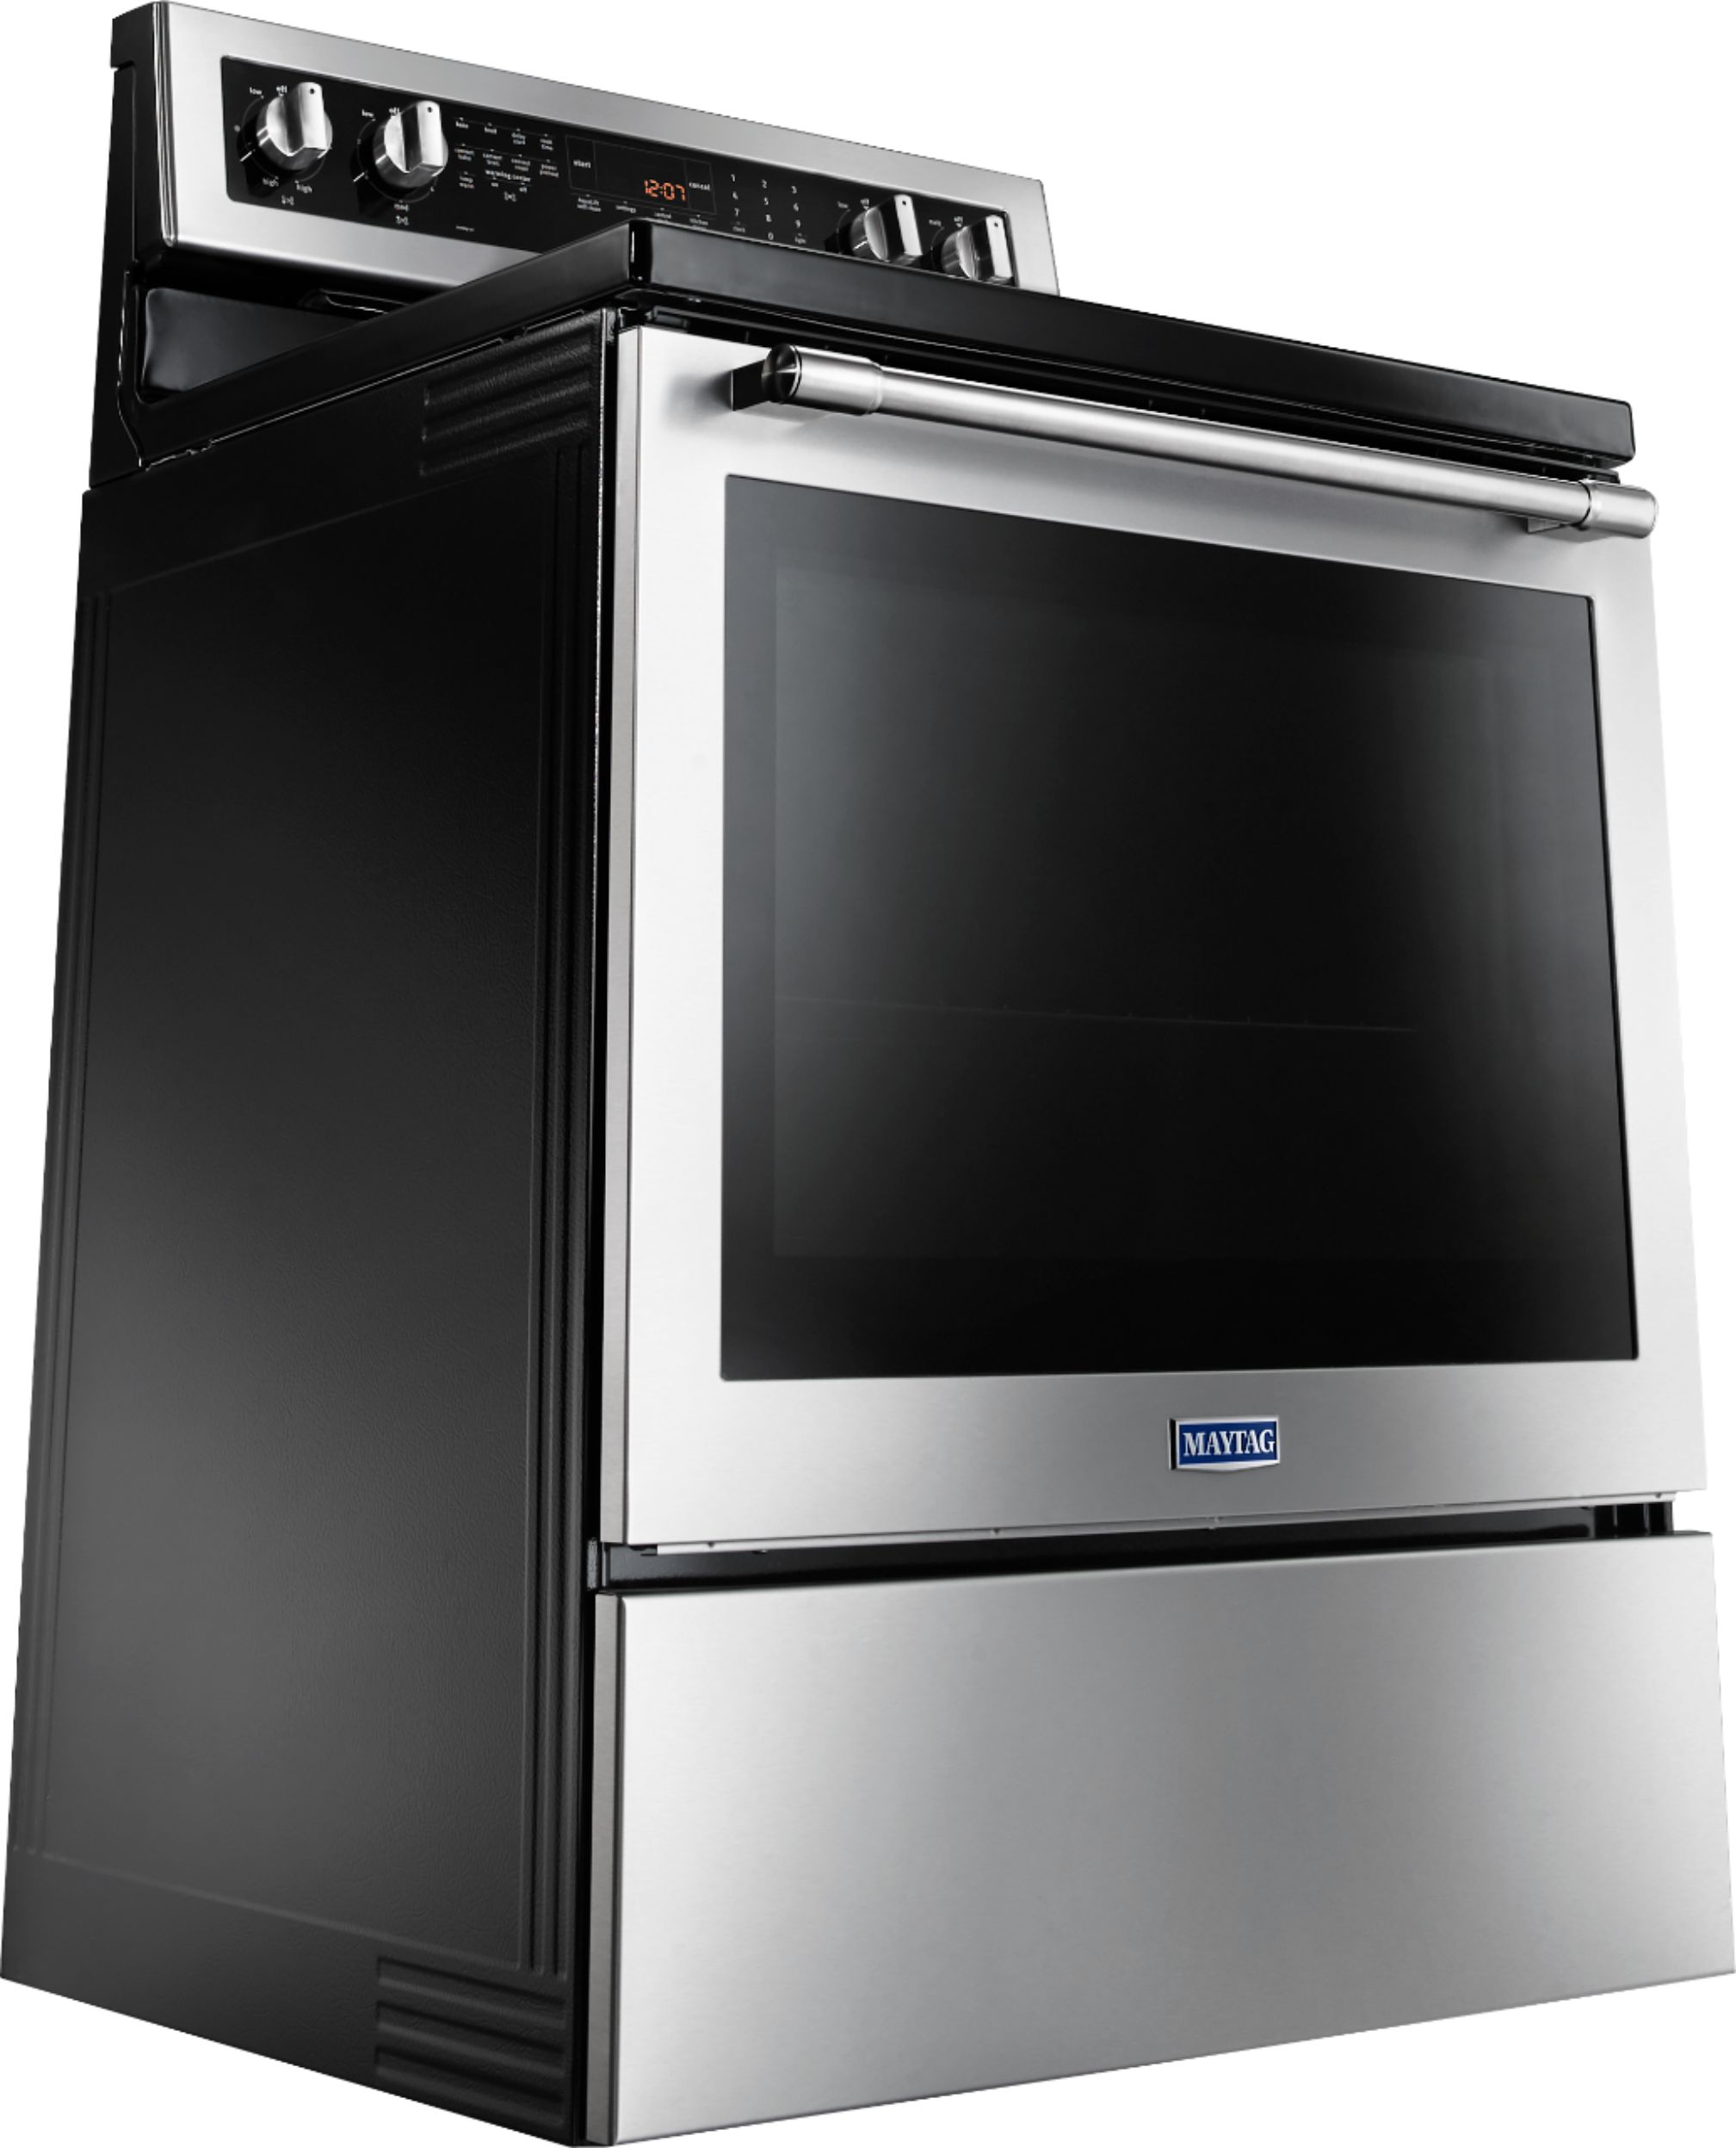 Angle View: Maytag - 6.4 Cu. Ft. Self-Cleaning Freestanding Fingerprint Resistant Electric Convection Range - Stainless steel